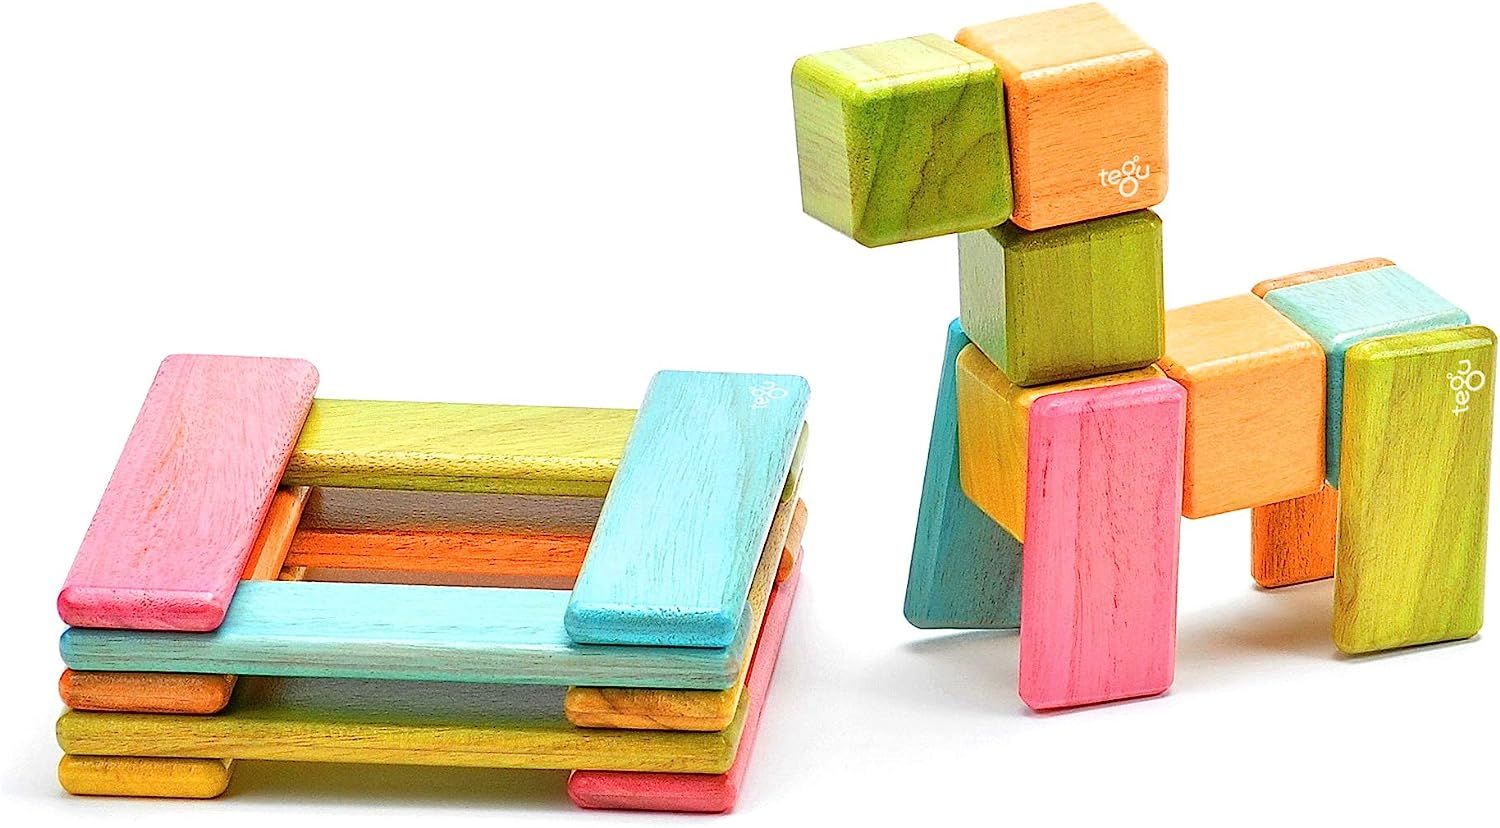 Tegu 26 Piece Tegu Discovery Magnetic Wooden Block Set